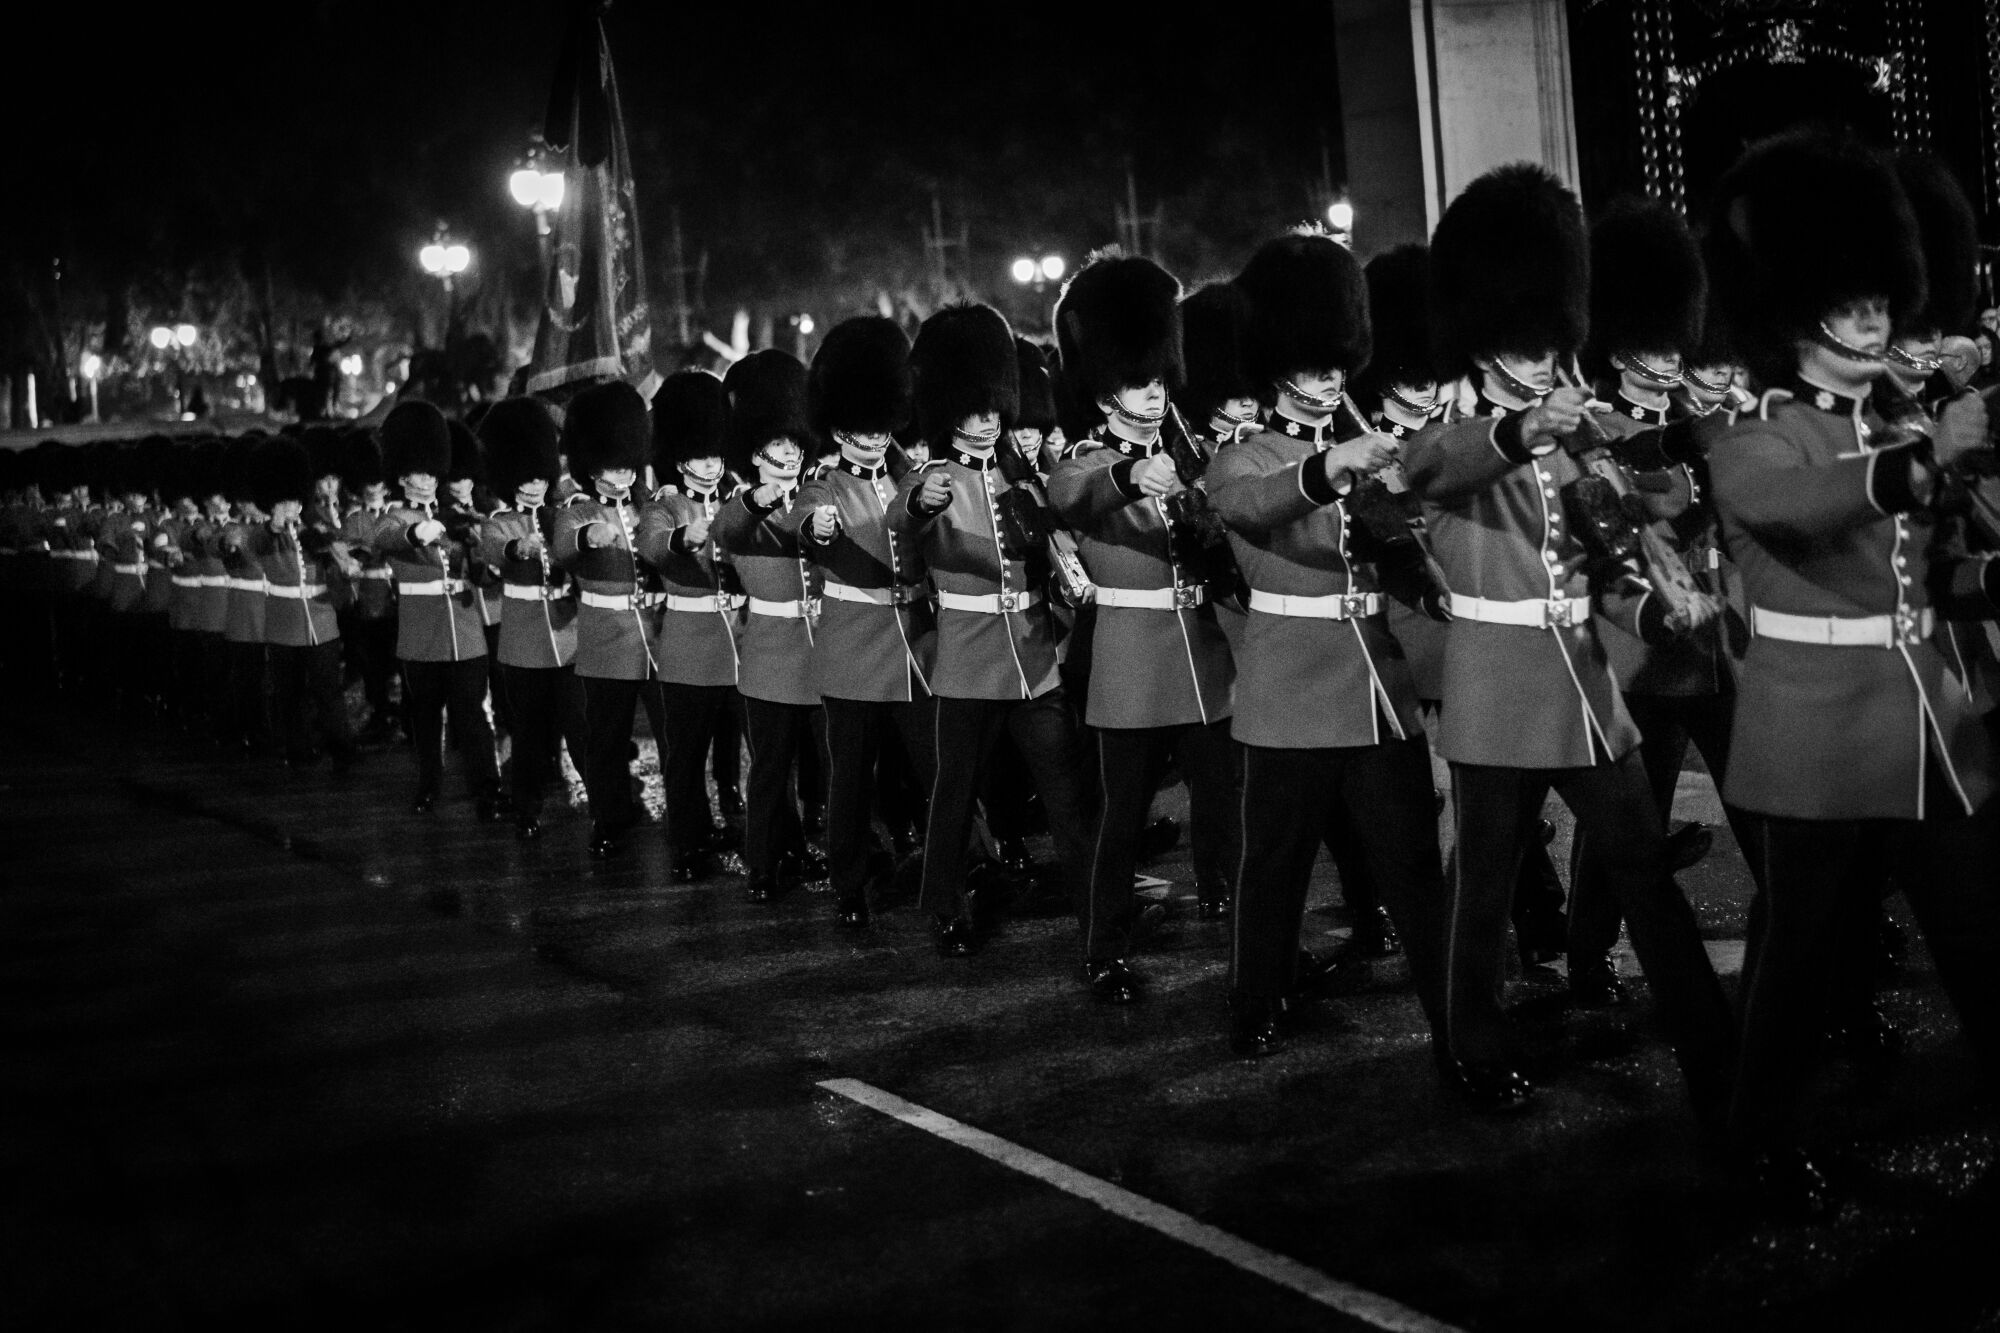 Buckingham Palace guards march in long lines at night.